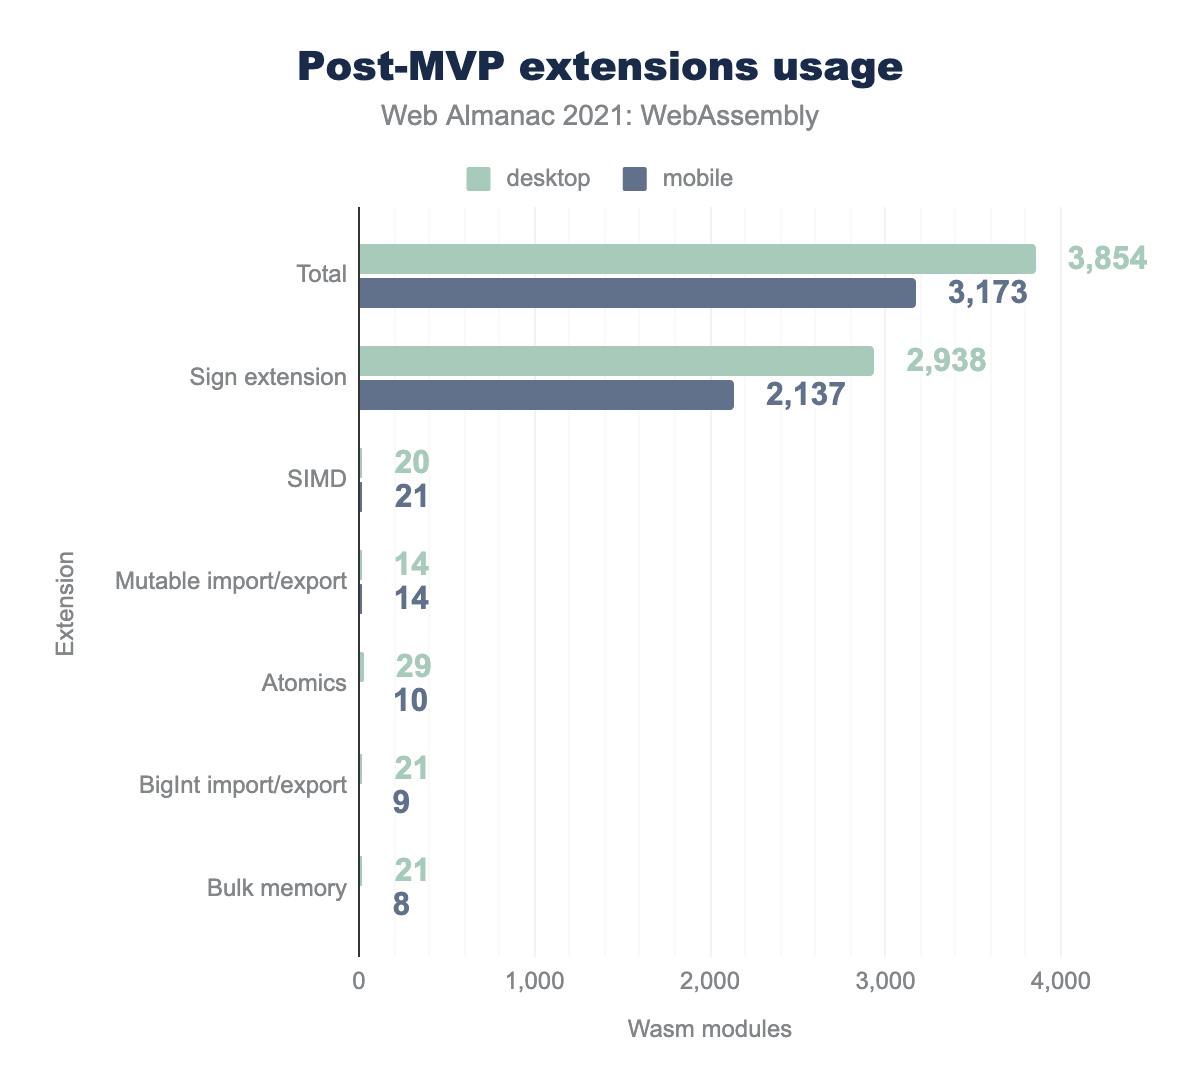 Post-MVP extensions usage.